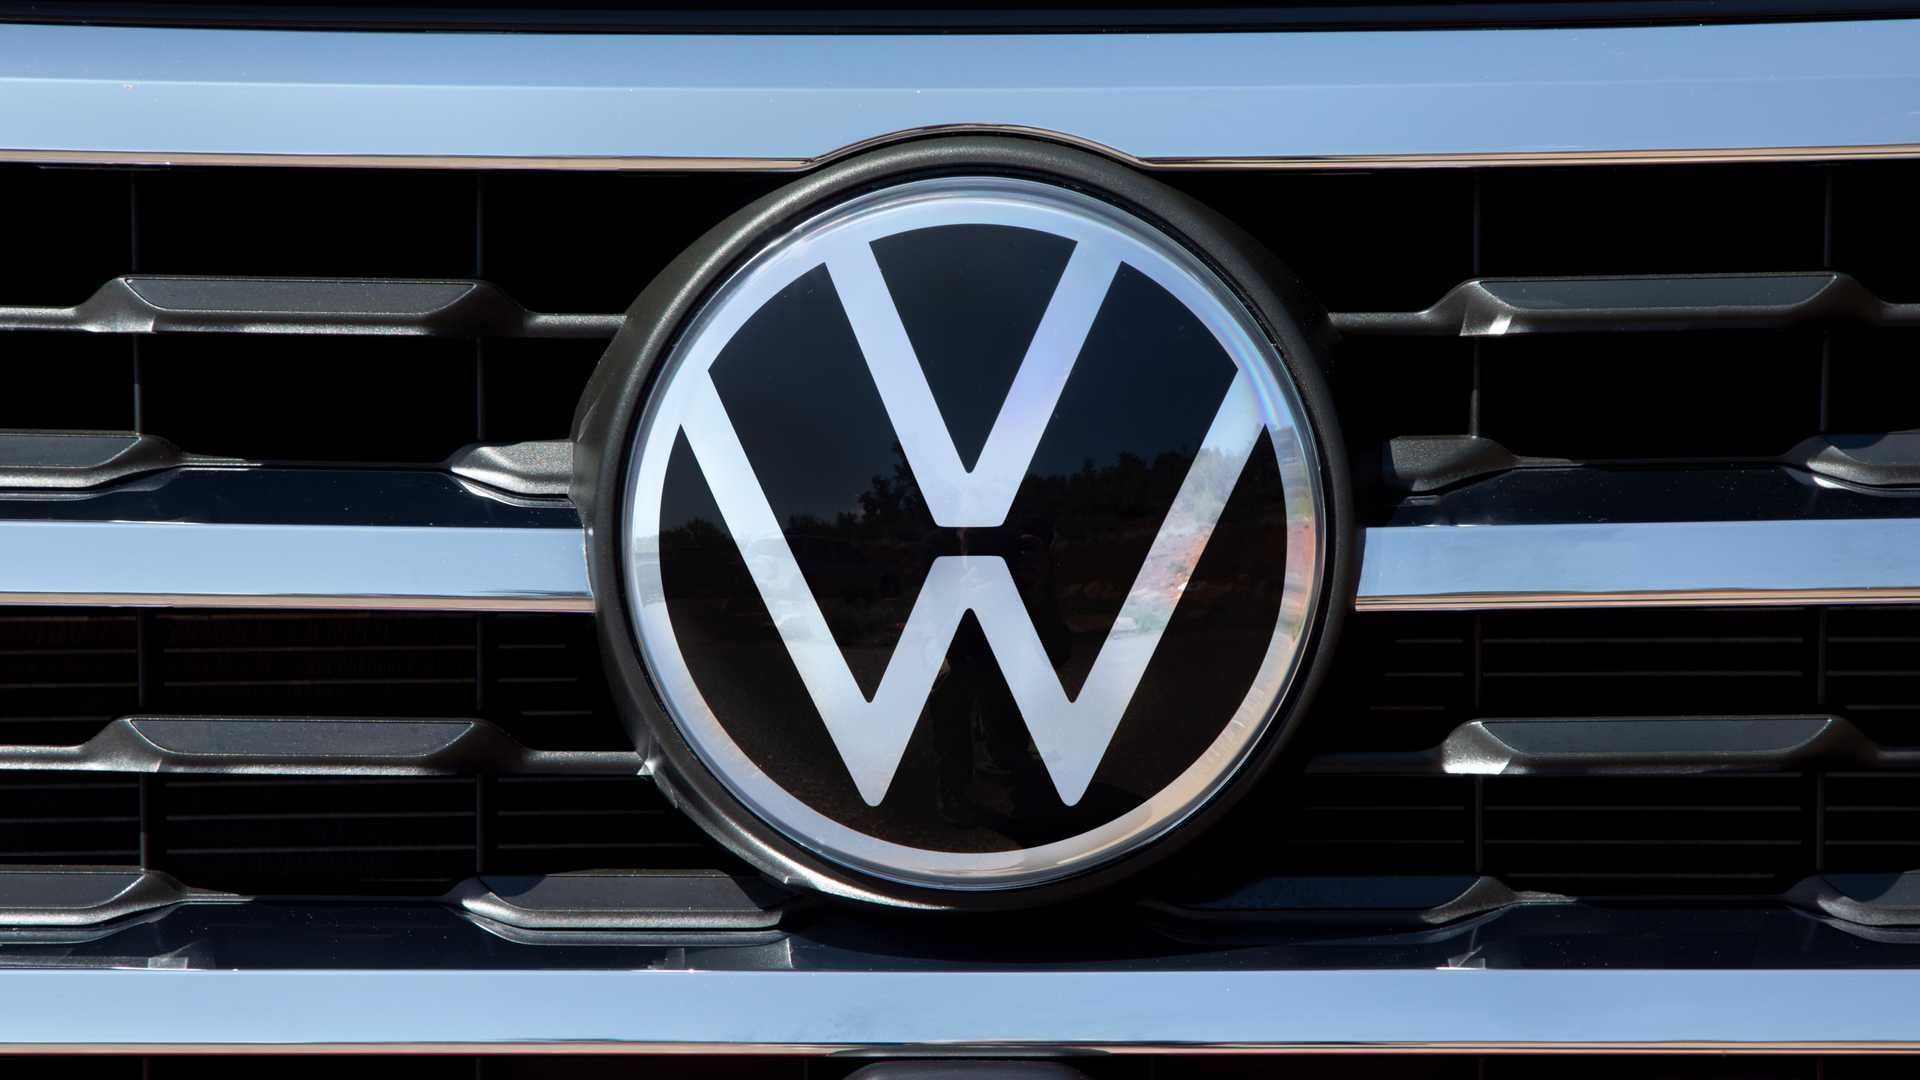 1920x1080 Here's What The New Volkswagen Logo Looks Like On A Grille